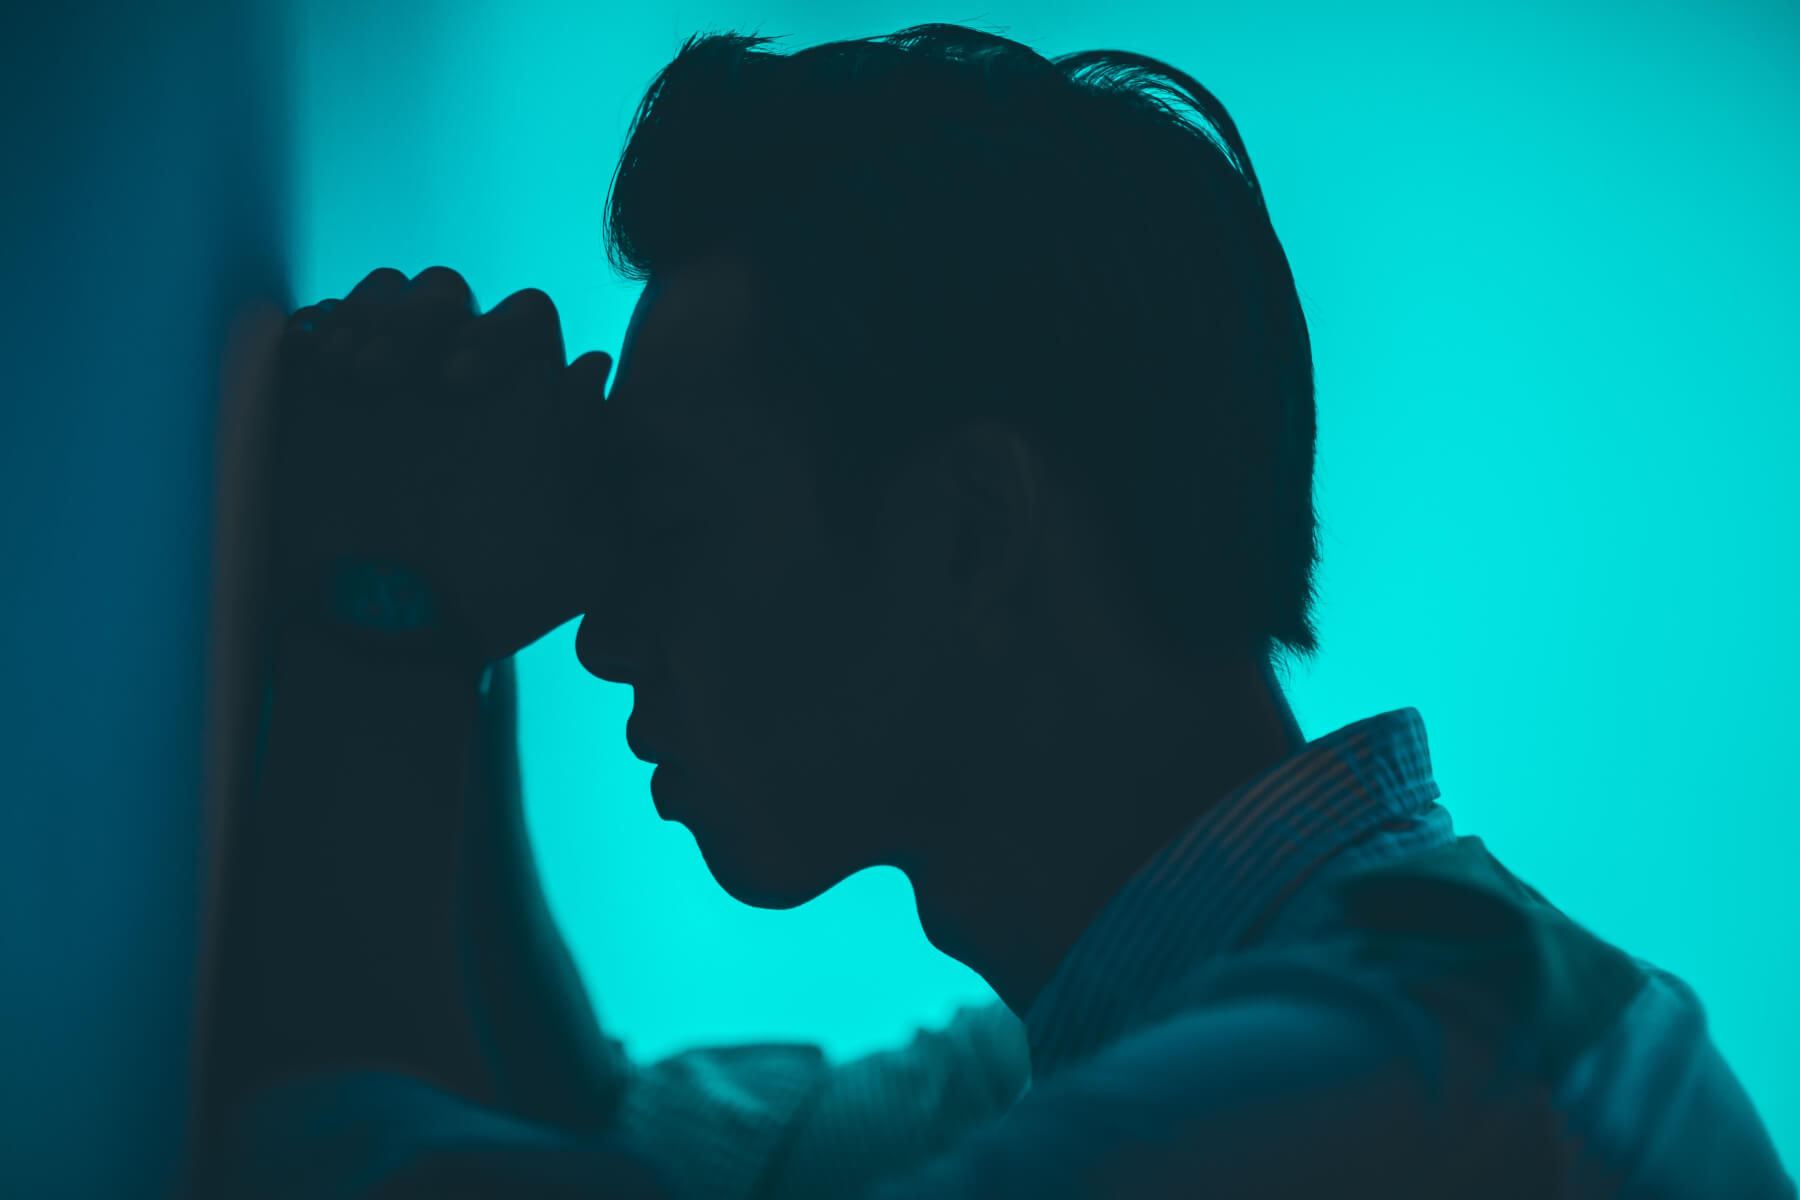 Man in silhouette against a cyan background